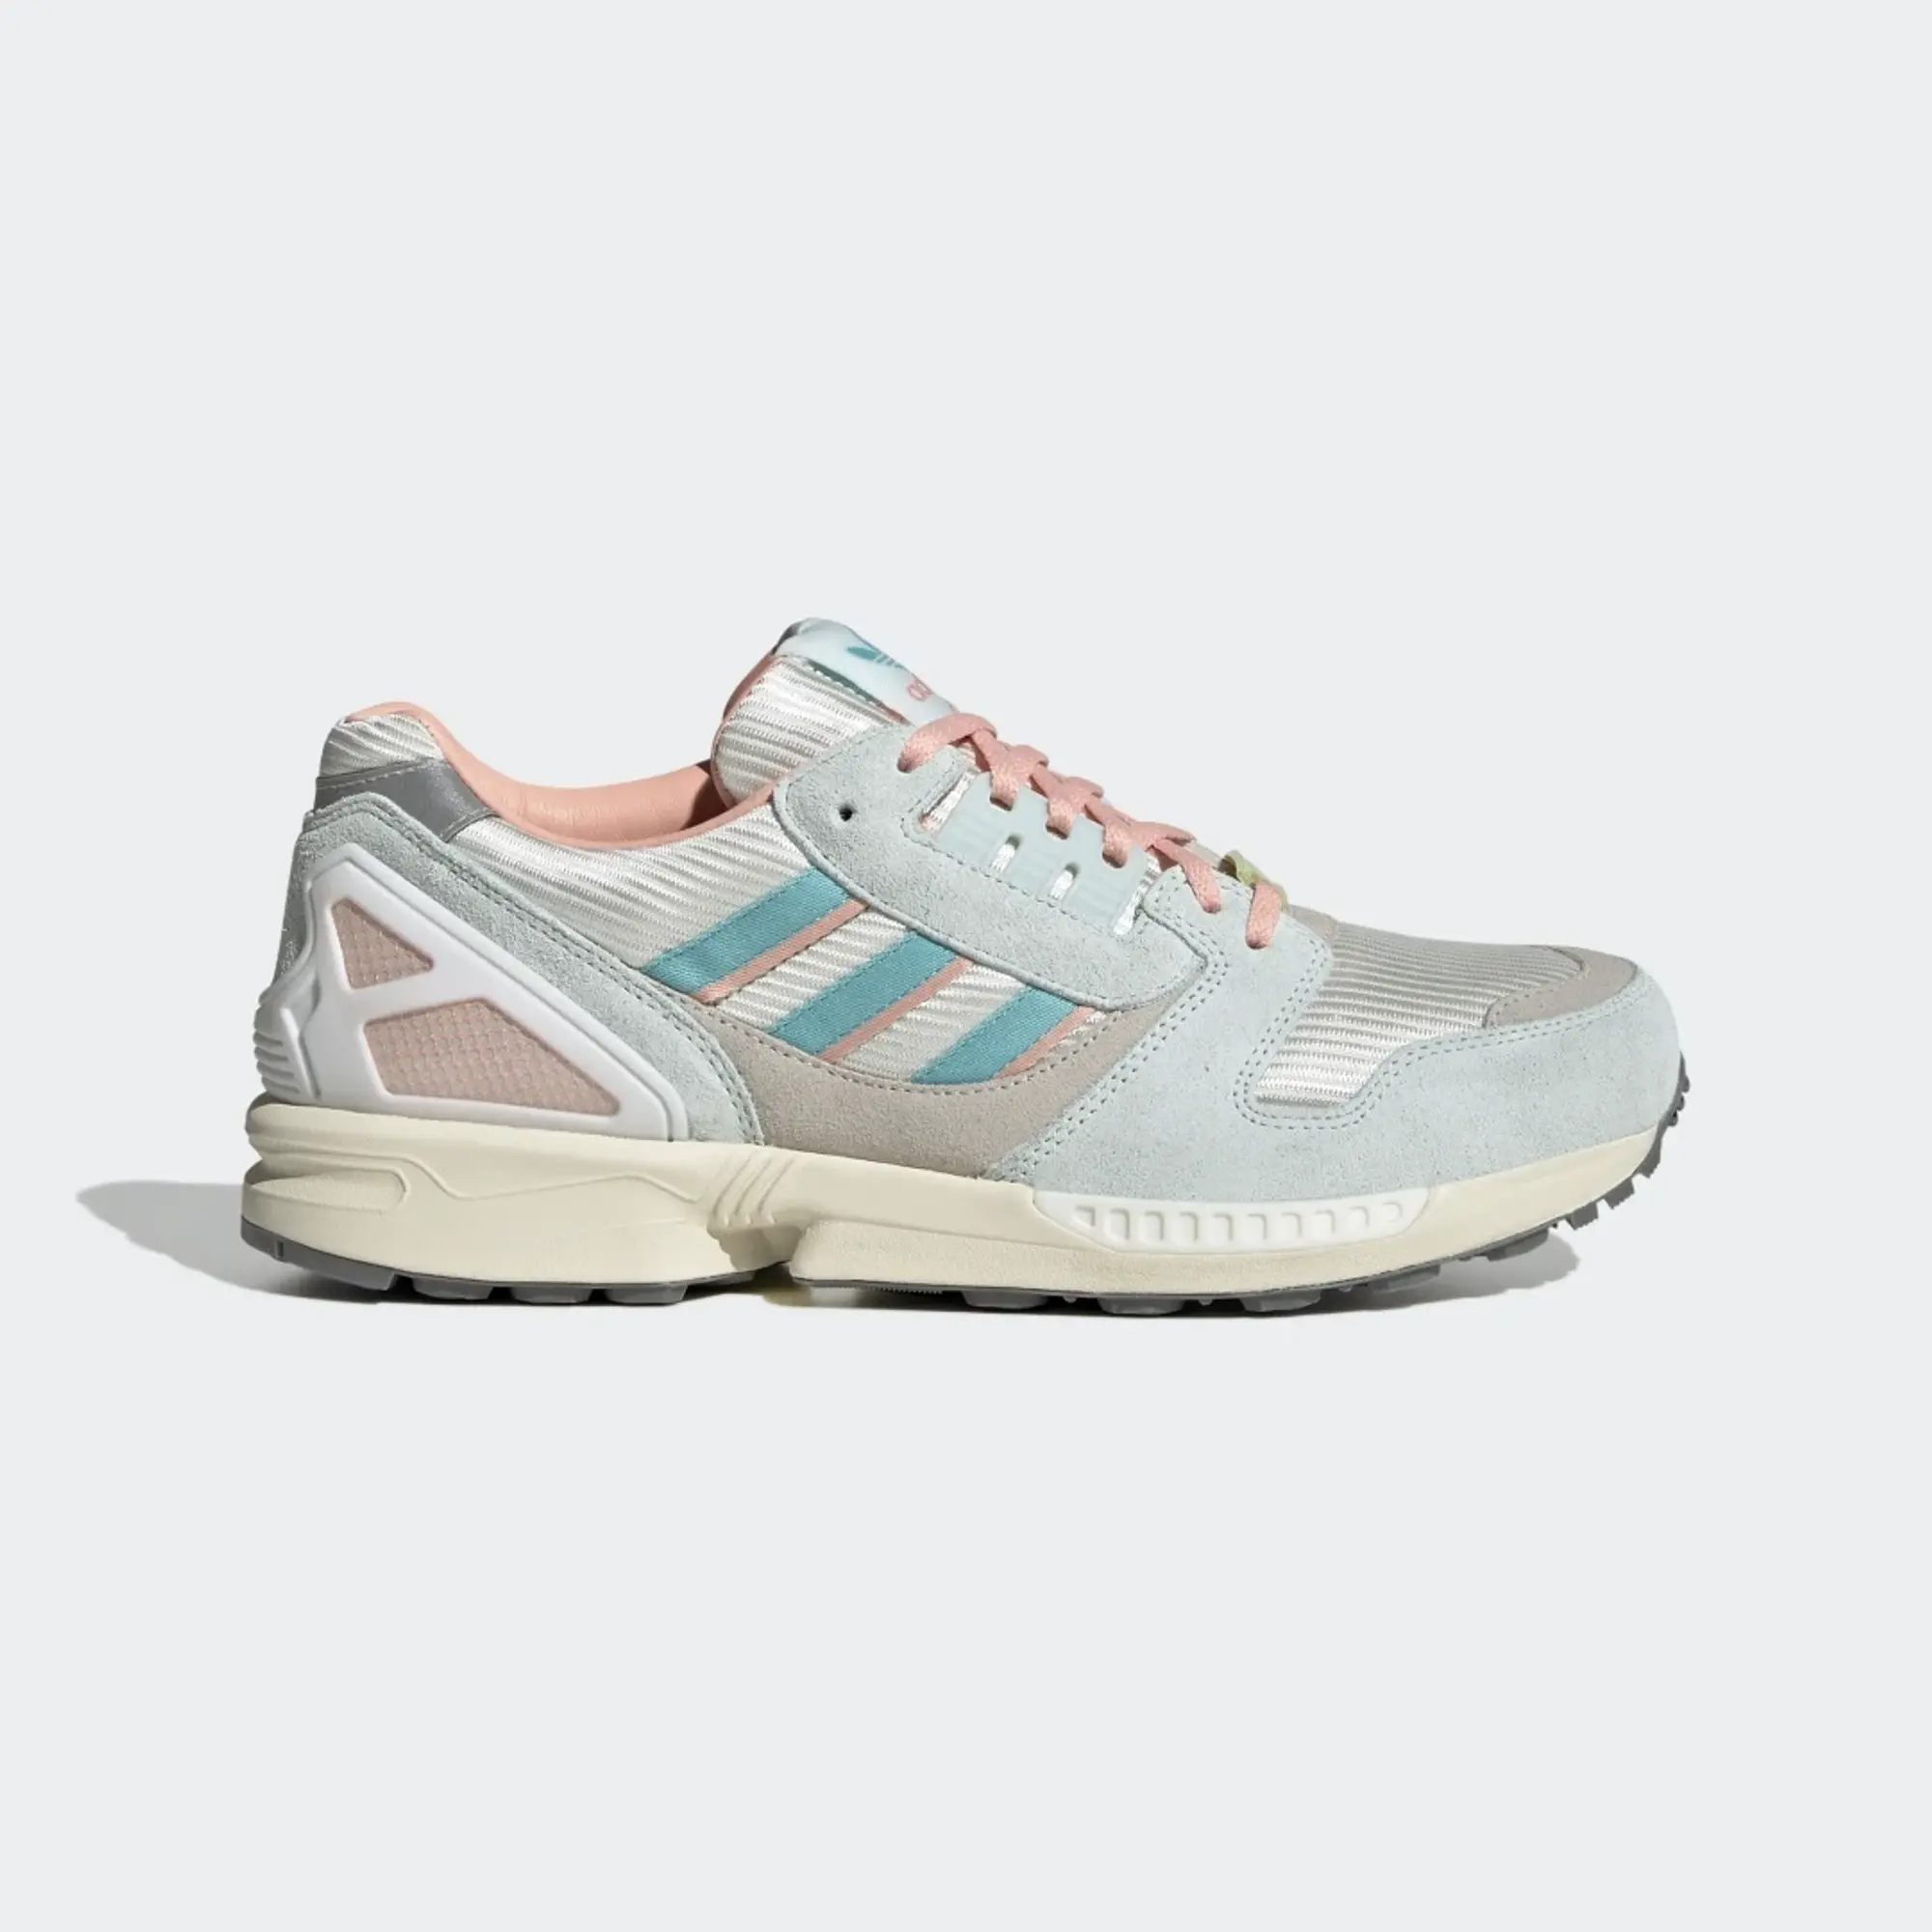 Adidas Men's ZX 8000 Ice Mint/Trace Pink/Cream White